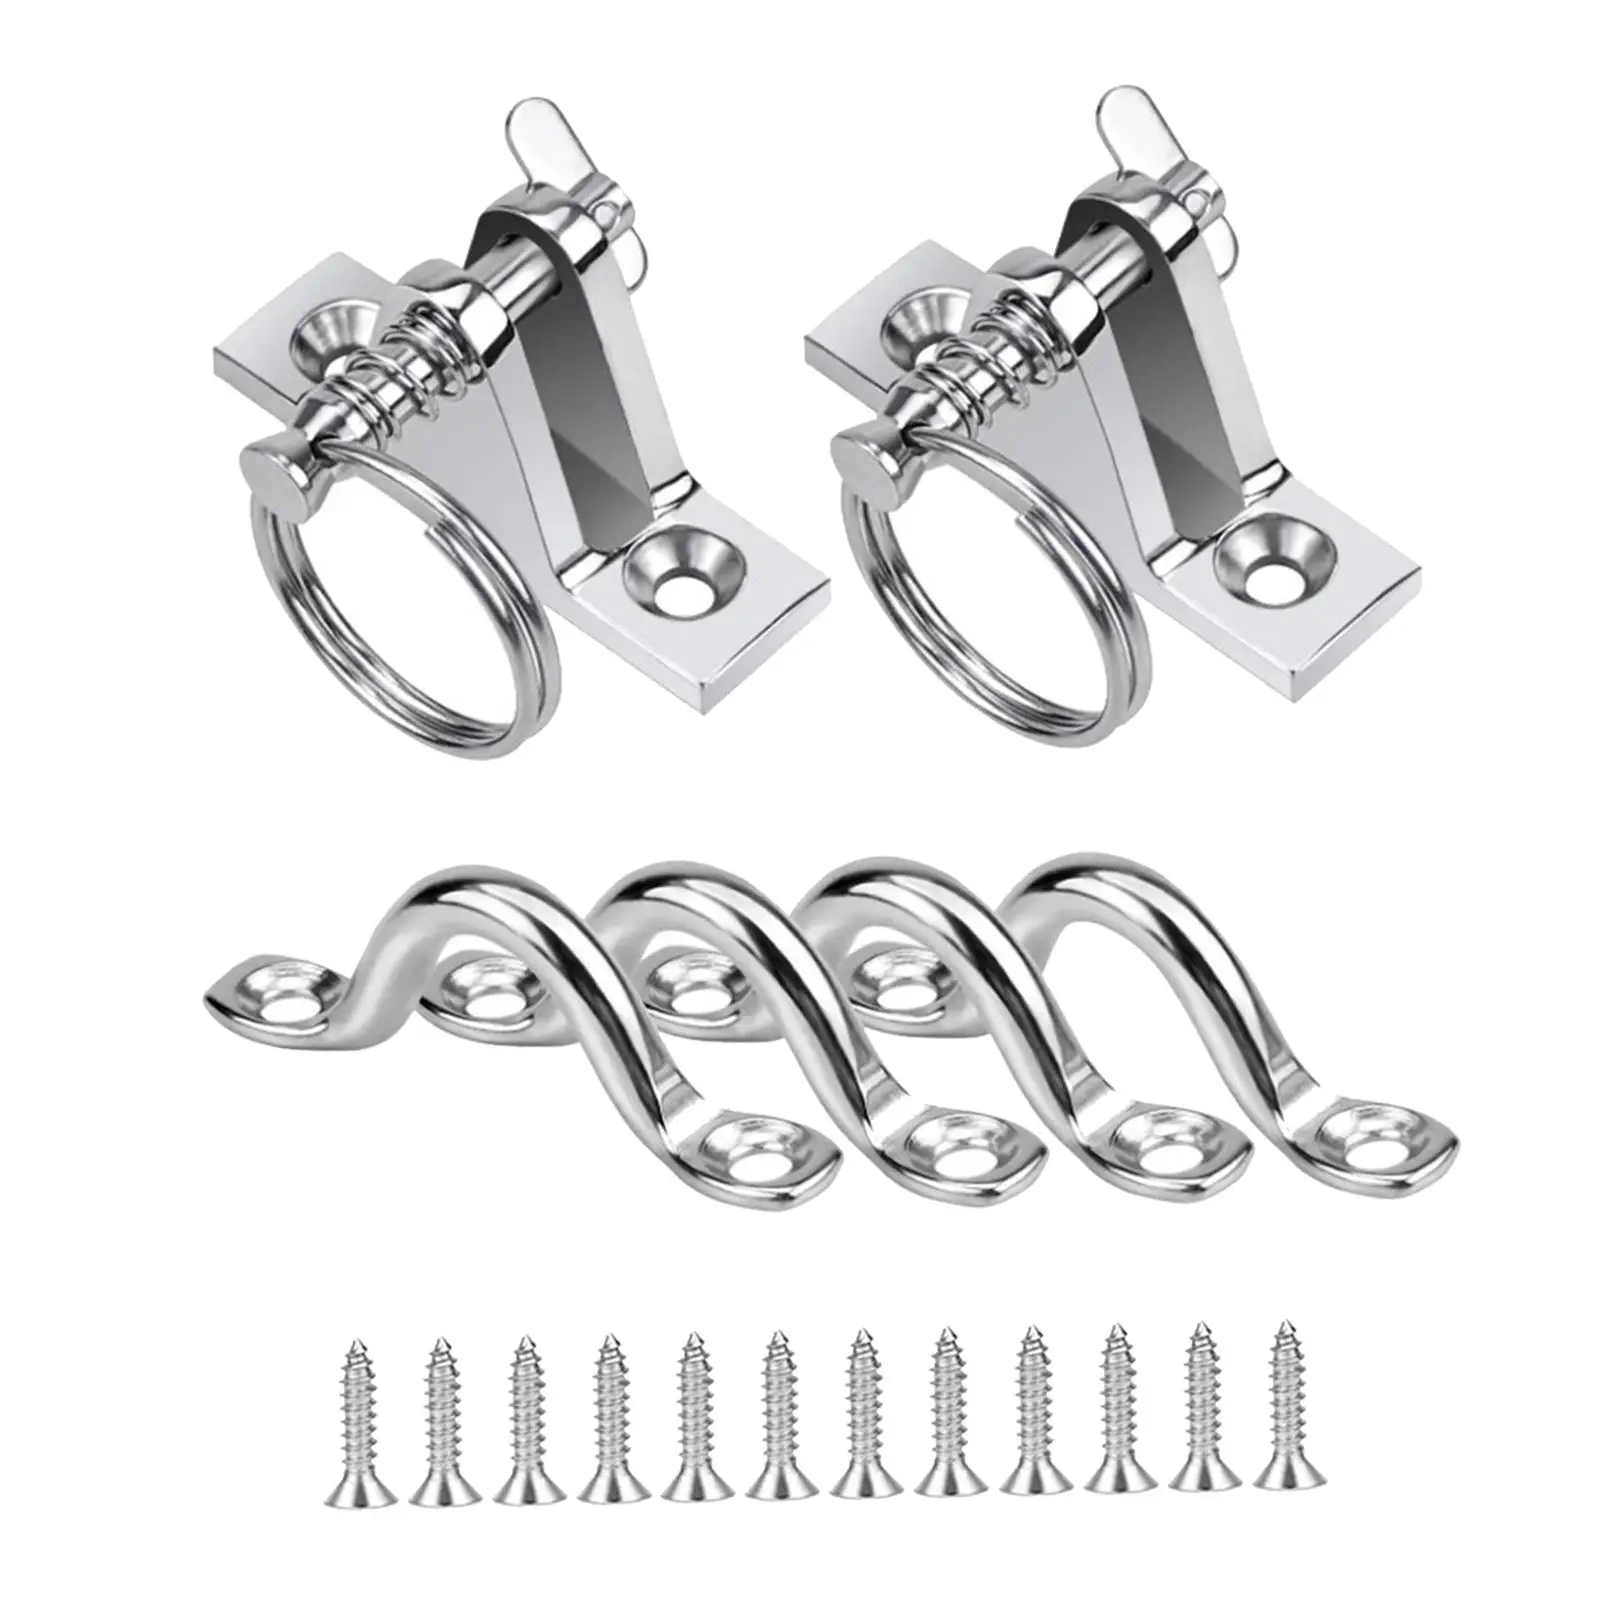 2Pack Bimini Top Deck Hinge with Pin , 316 Stainless Steel, with Installation Screws Set